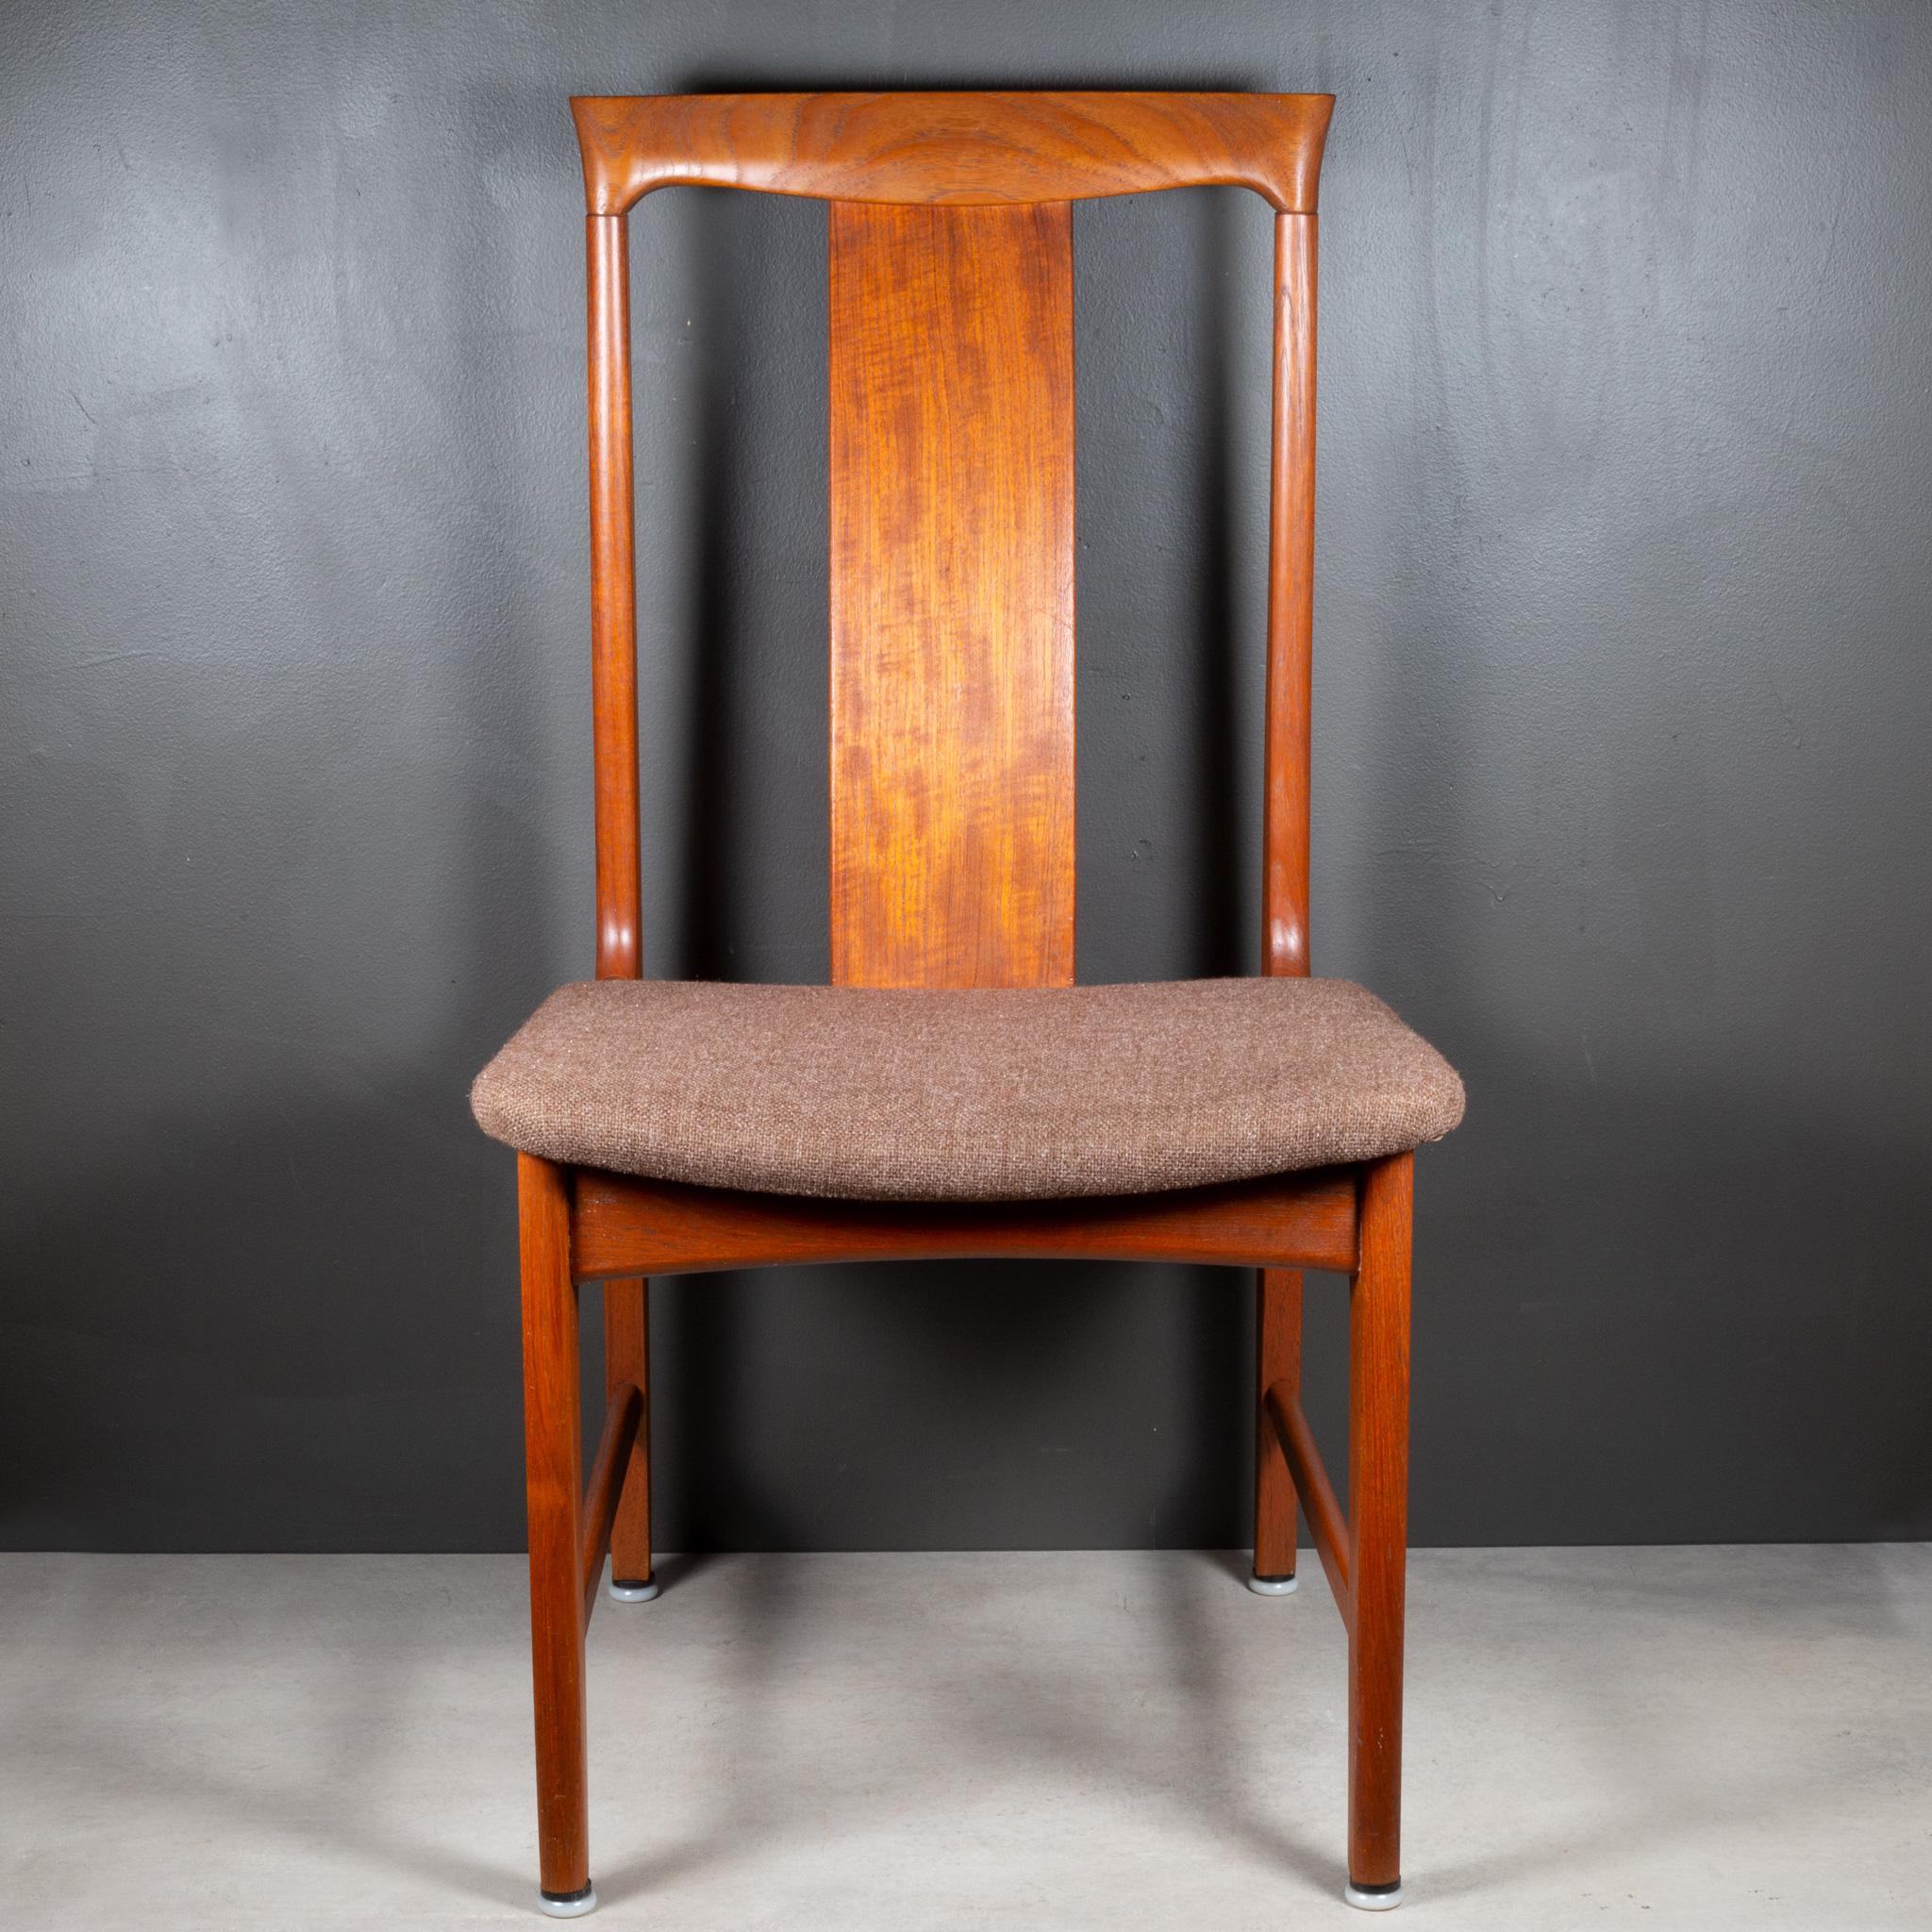 Midcentury Japanese Sculpted Teak Dining Chairs C.1960 For Sale 1